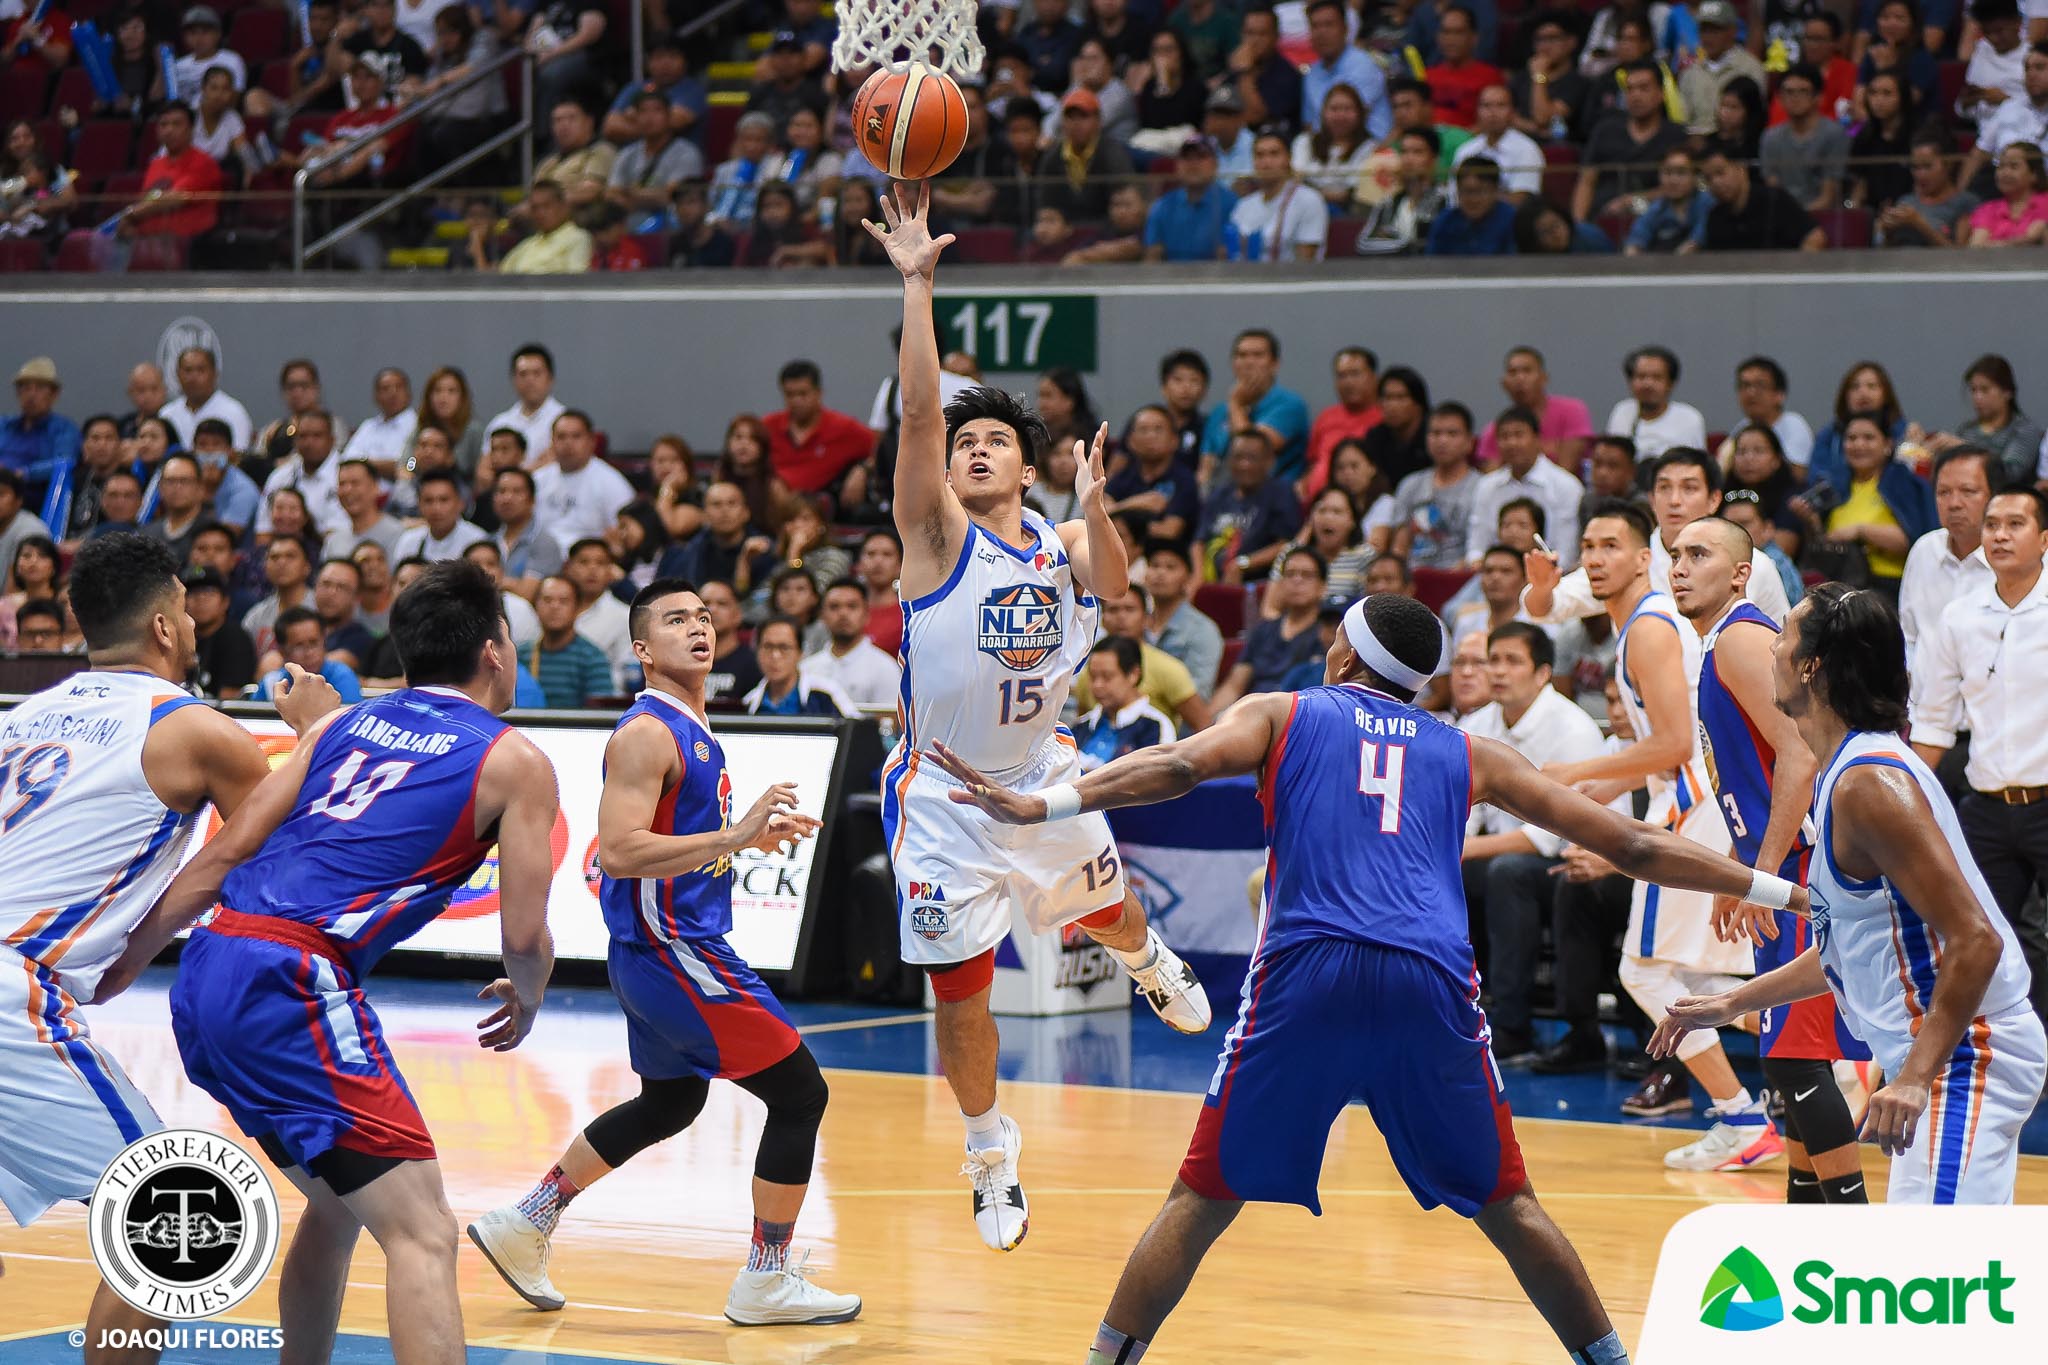 PBA-2018-Magnoli-vs.-NLEX-G2-Ravena-3349 After seeing Hotshots bounce back, Kiefer Ravena vows: 'We'll learn from this' Basketball News PBA  - philippine sports news